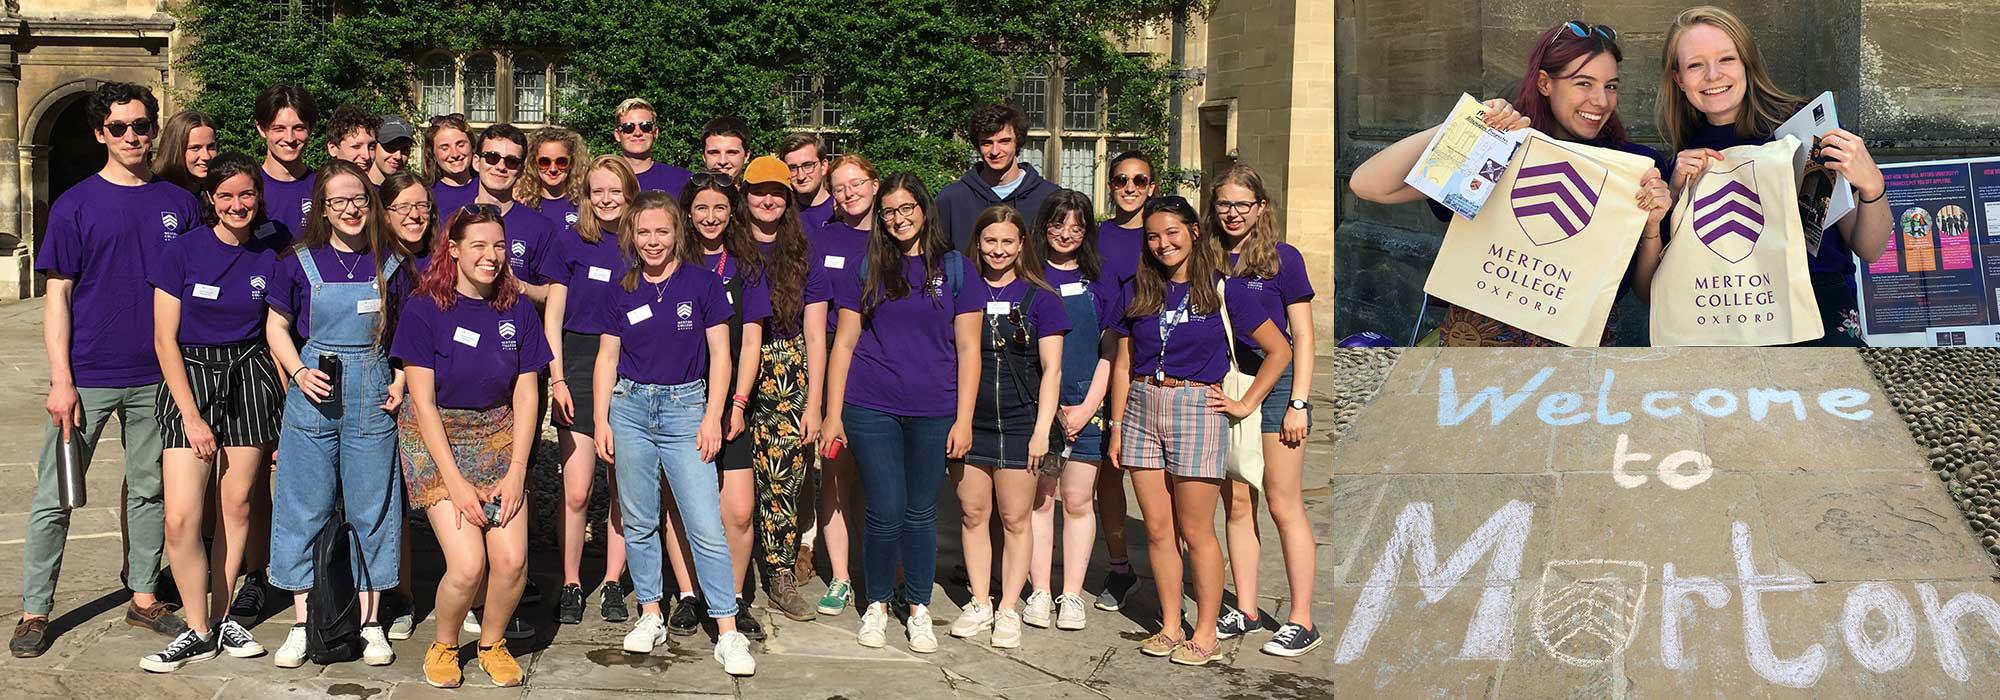 The July 2019 Open Days team